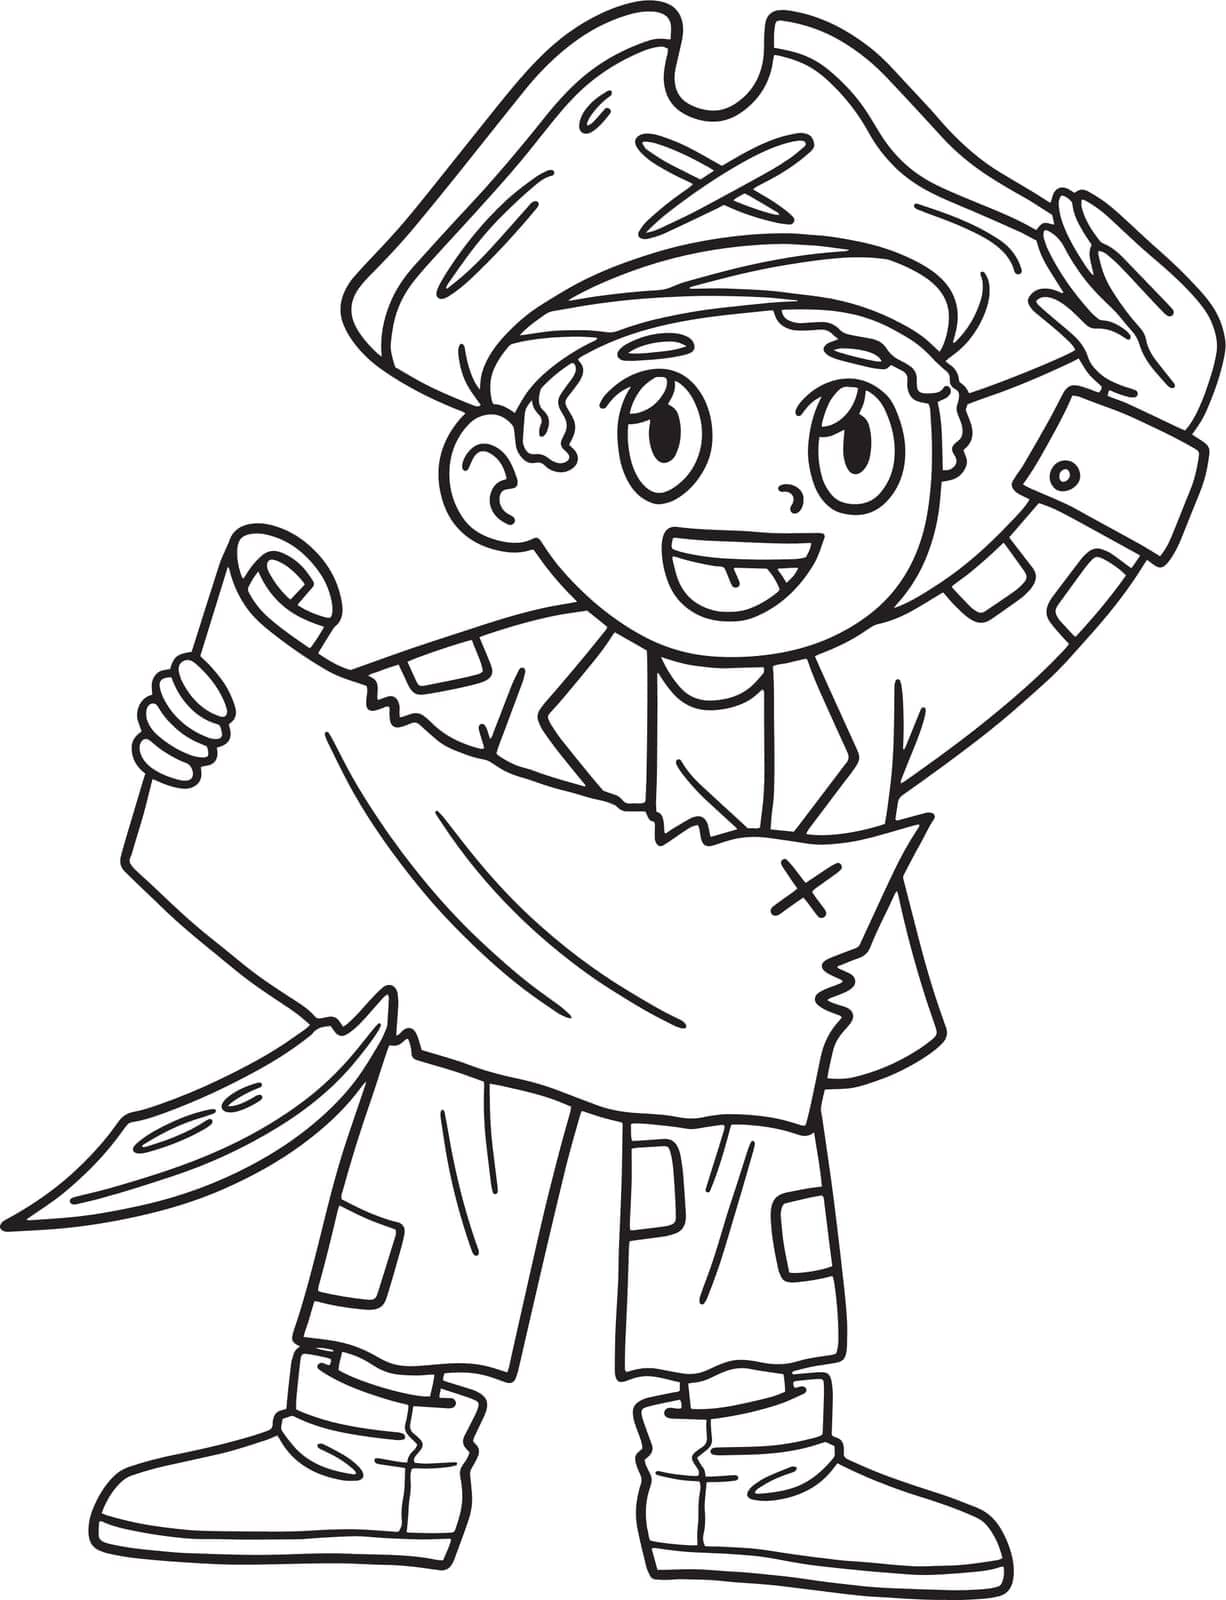 Pirate with Treasure Map Isolated Coloring Page by abbydesign